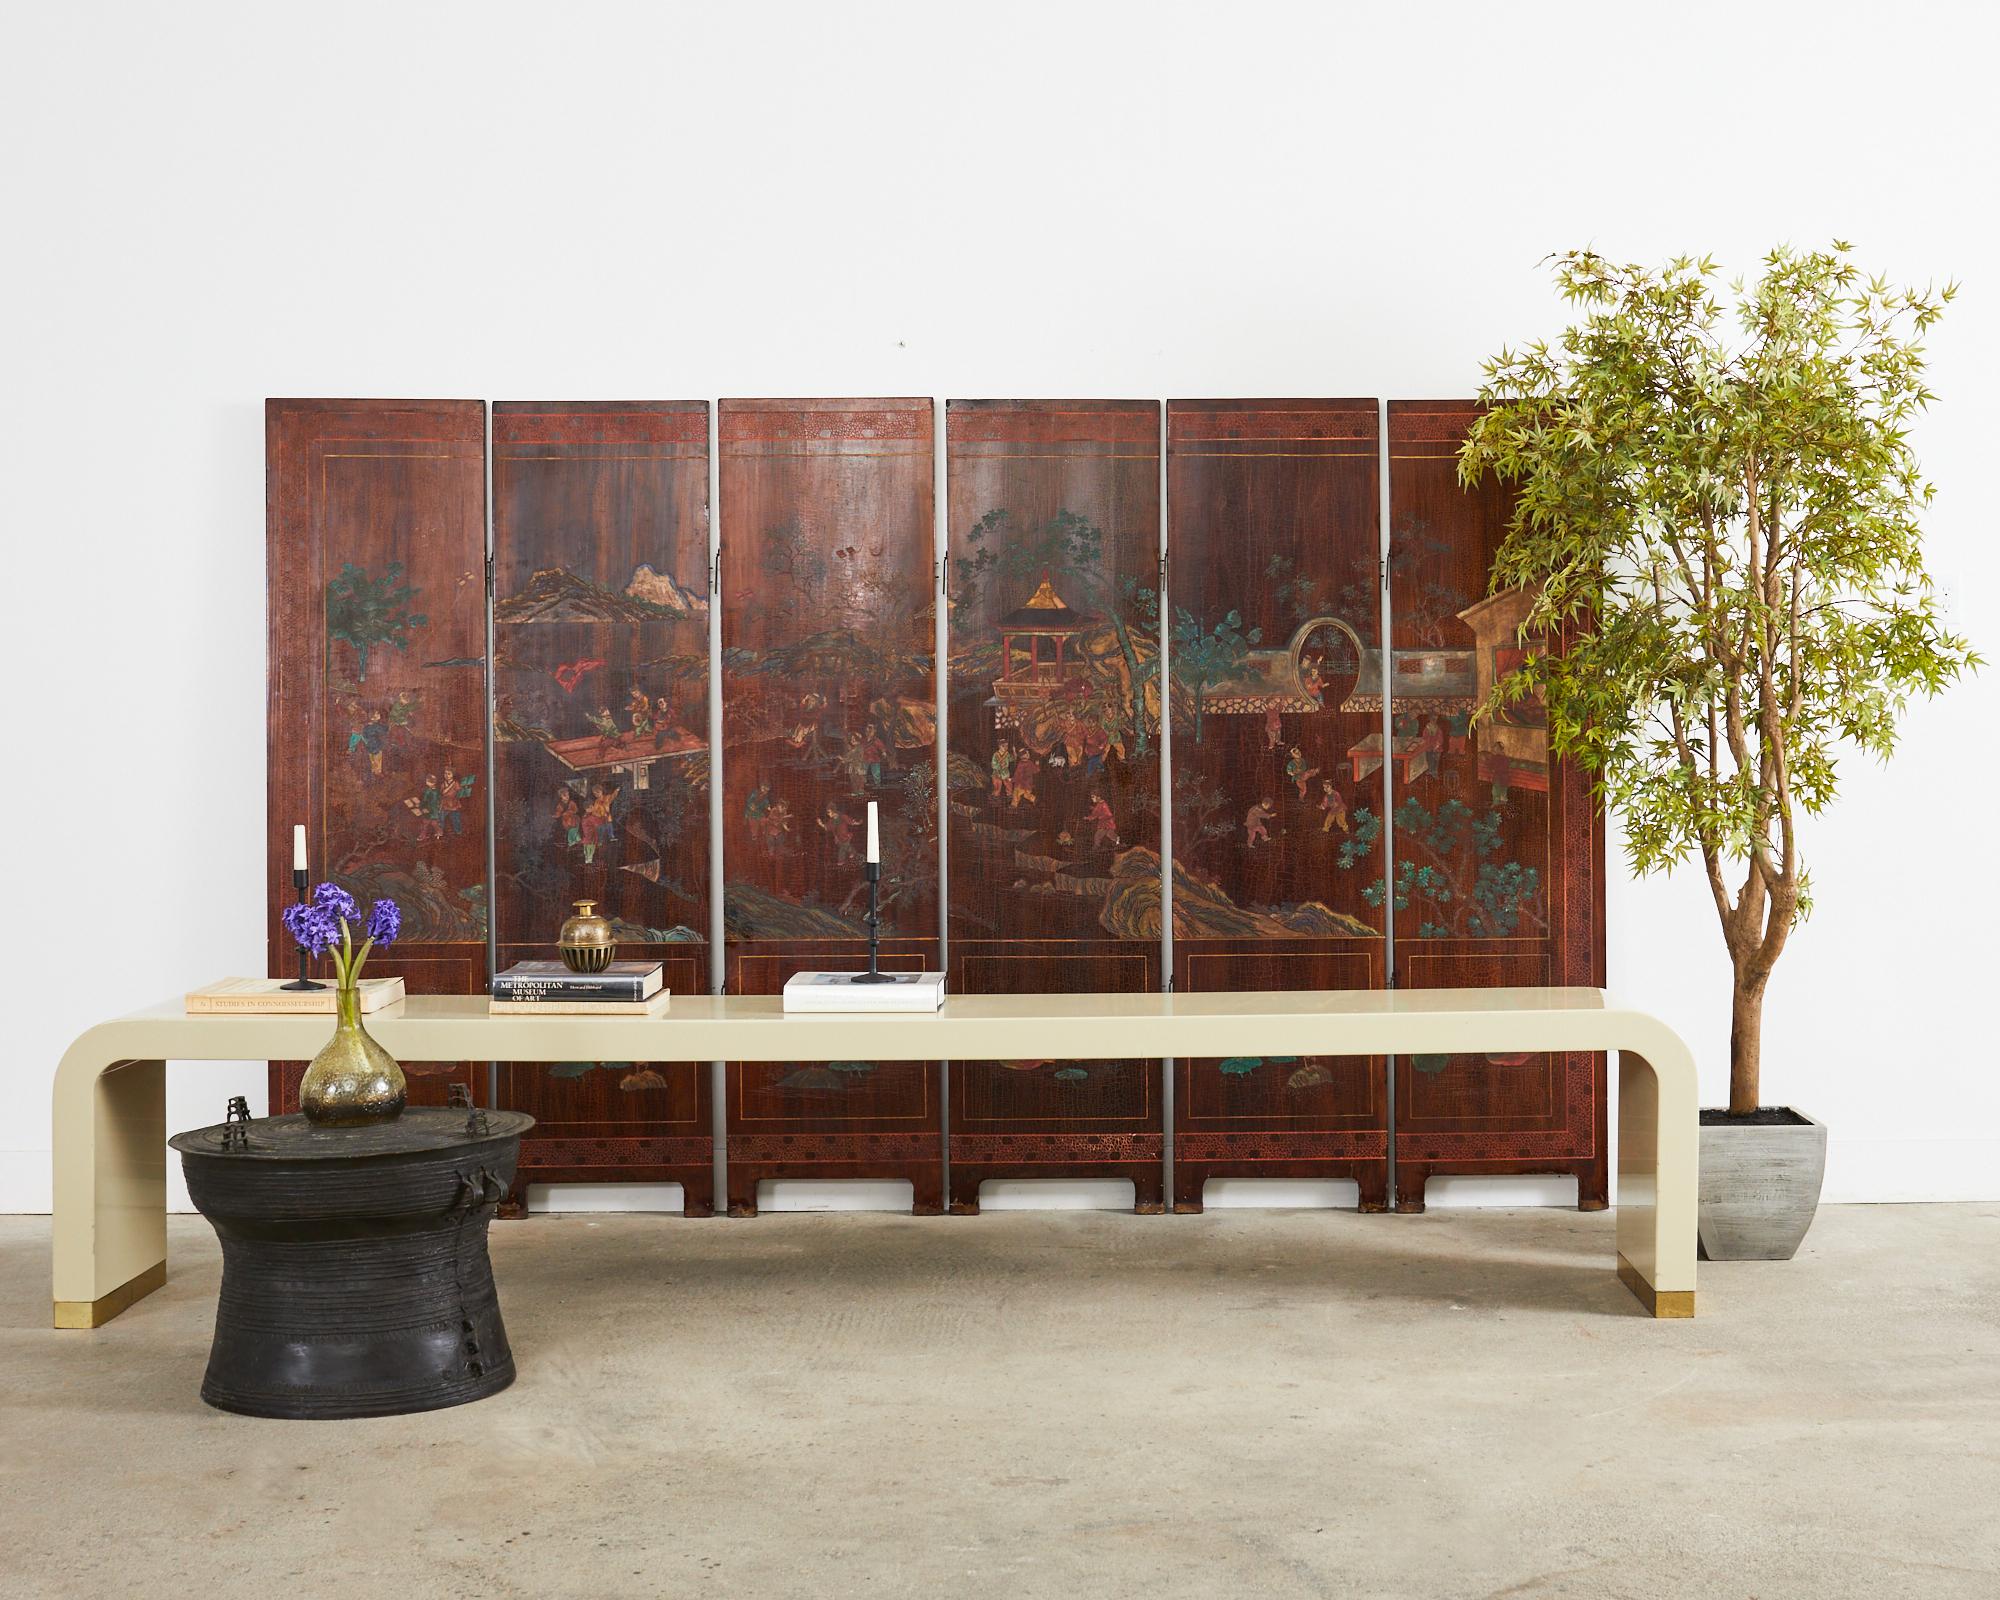 Beautifully weathered patina Chinese export lacquered coromandel screen with six double sided panels. The screen features a mountain landscape on one side and an idyllic pavilion landscape on the other. The pavilion scene features a fertility style